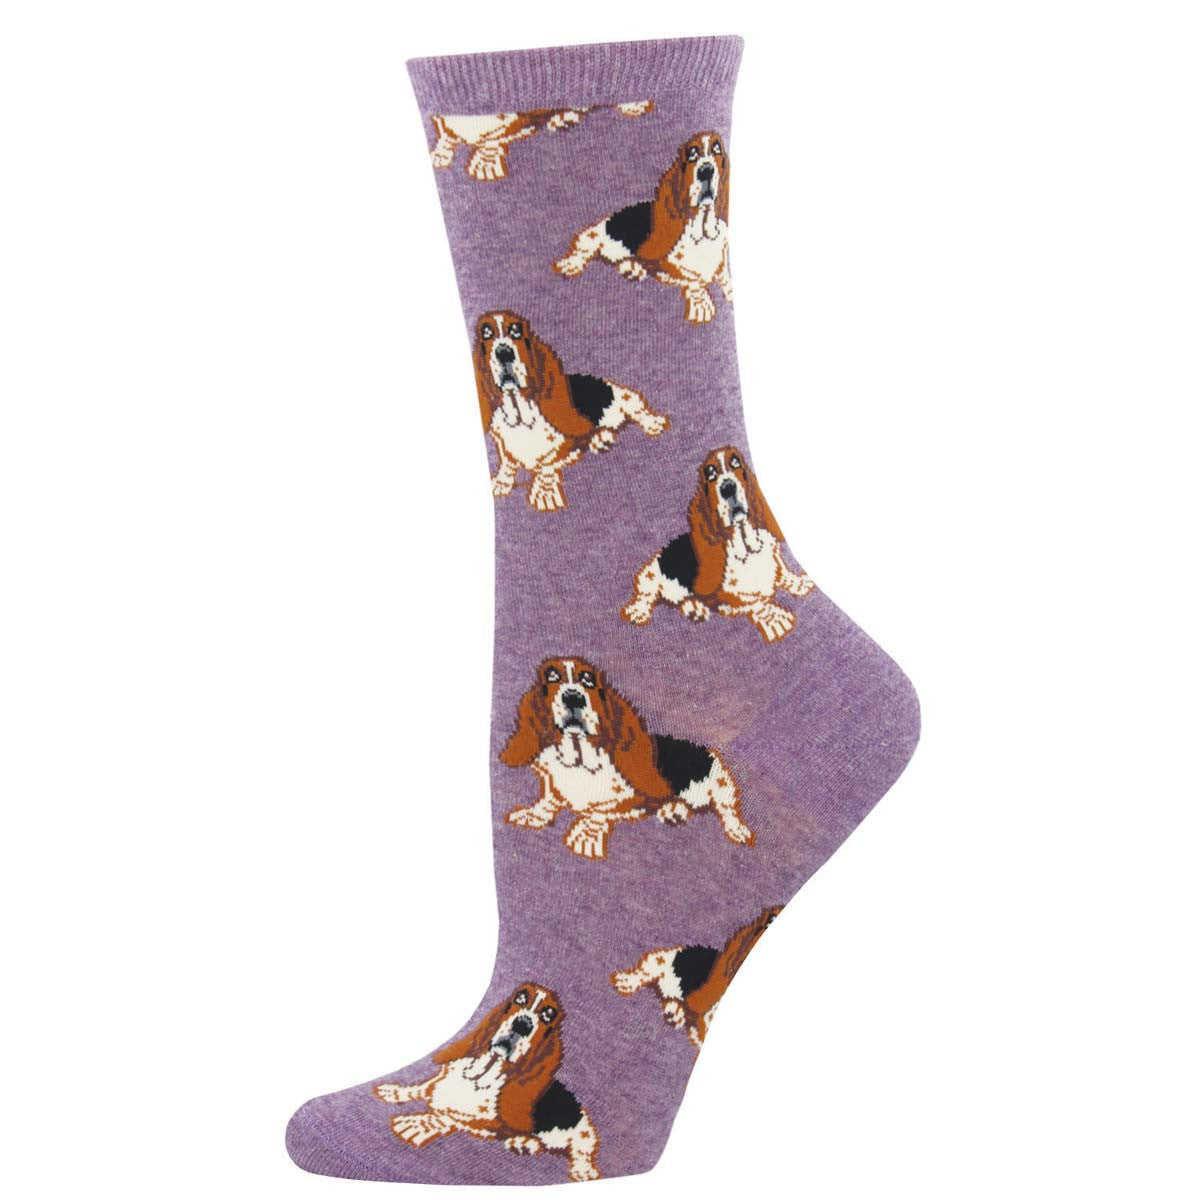 ZZNA_Women's Nothing But A Hound Dog Crew (Lavender Heather)